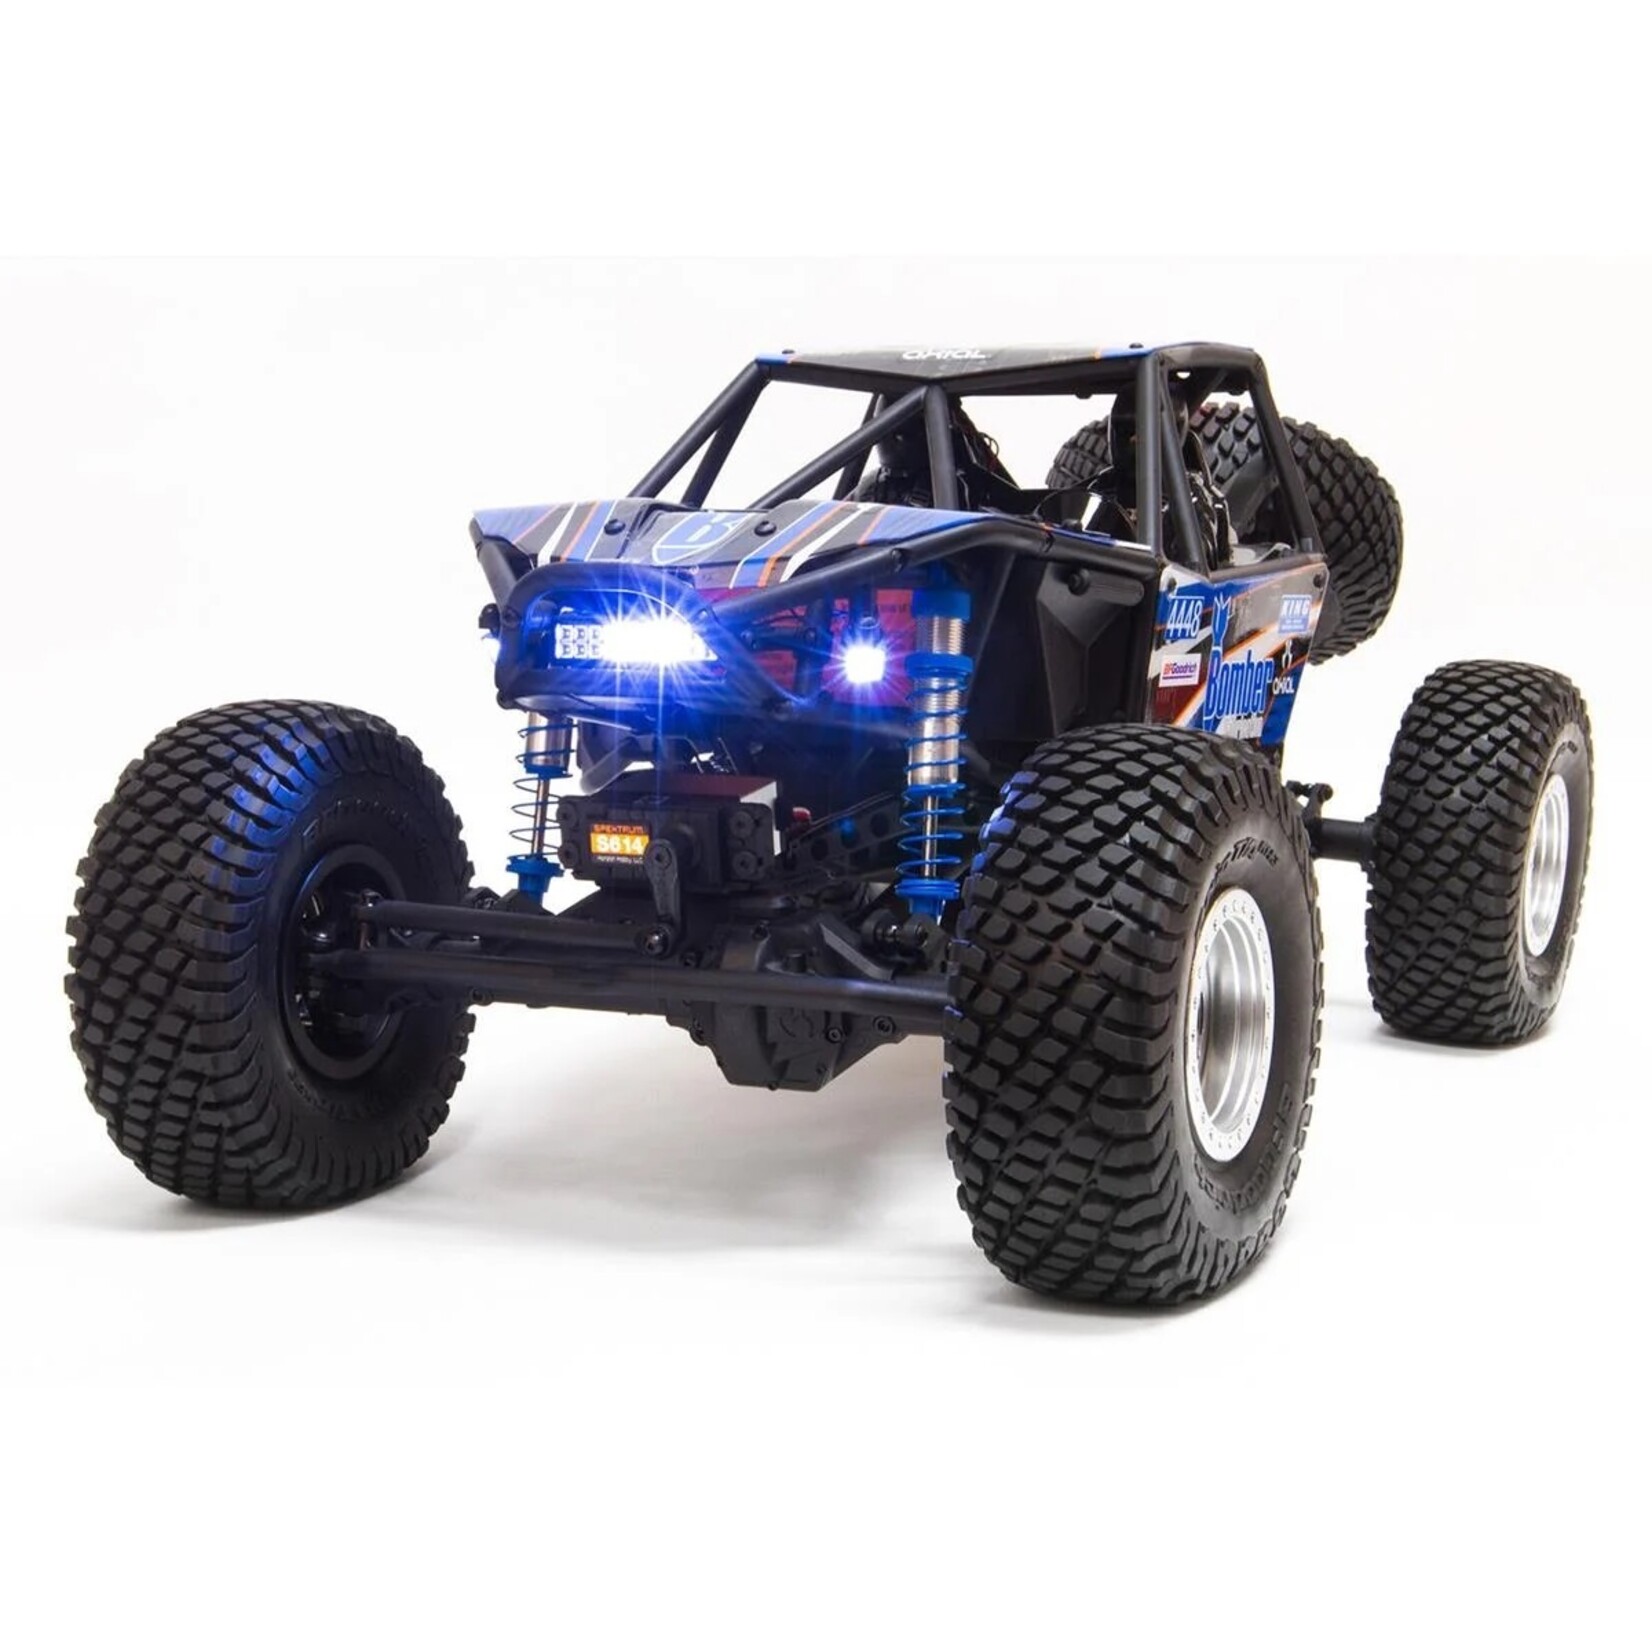 Axial RR10 Bomber 2.0 1/10 RTR Rock Racer (Blue) w/DX3 Radio